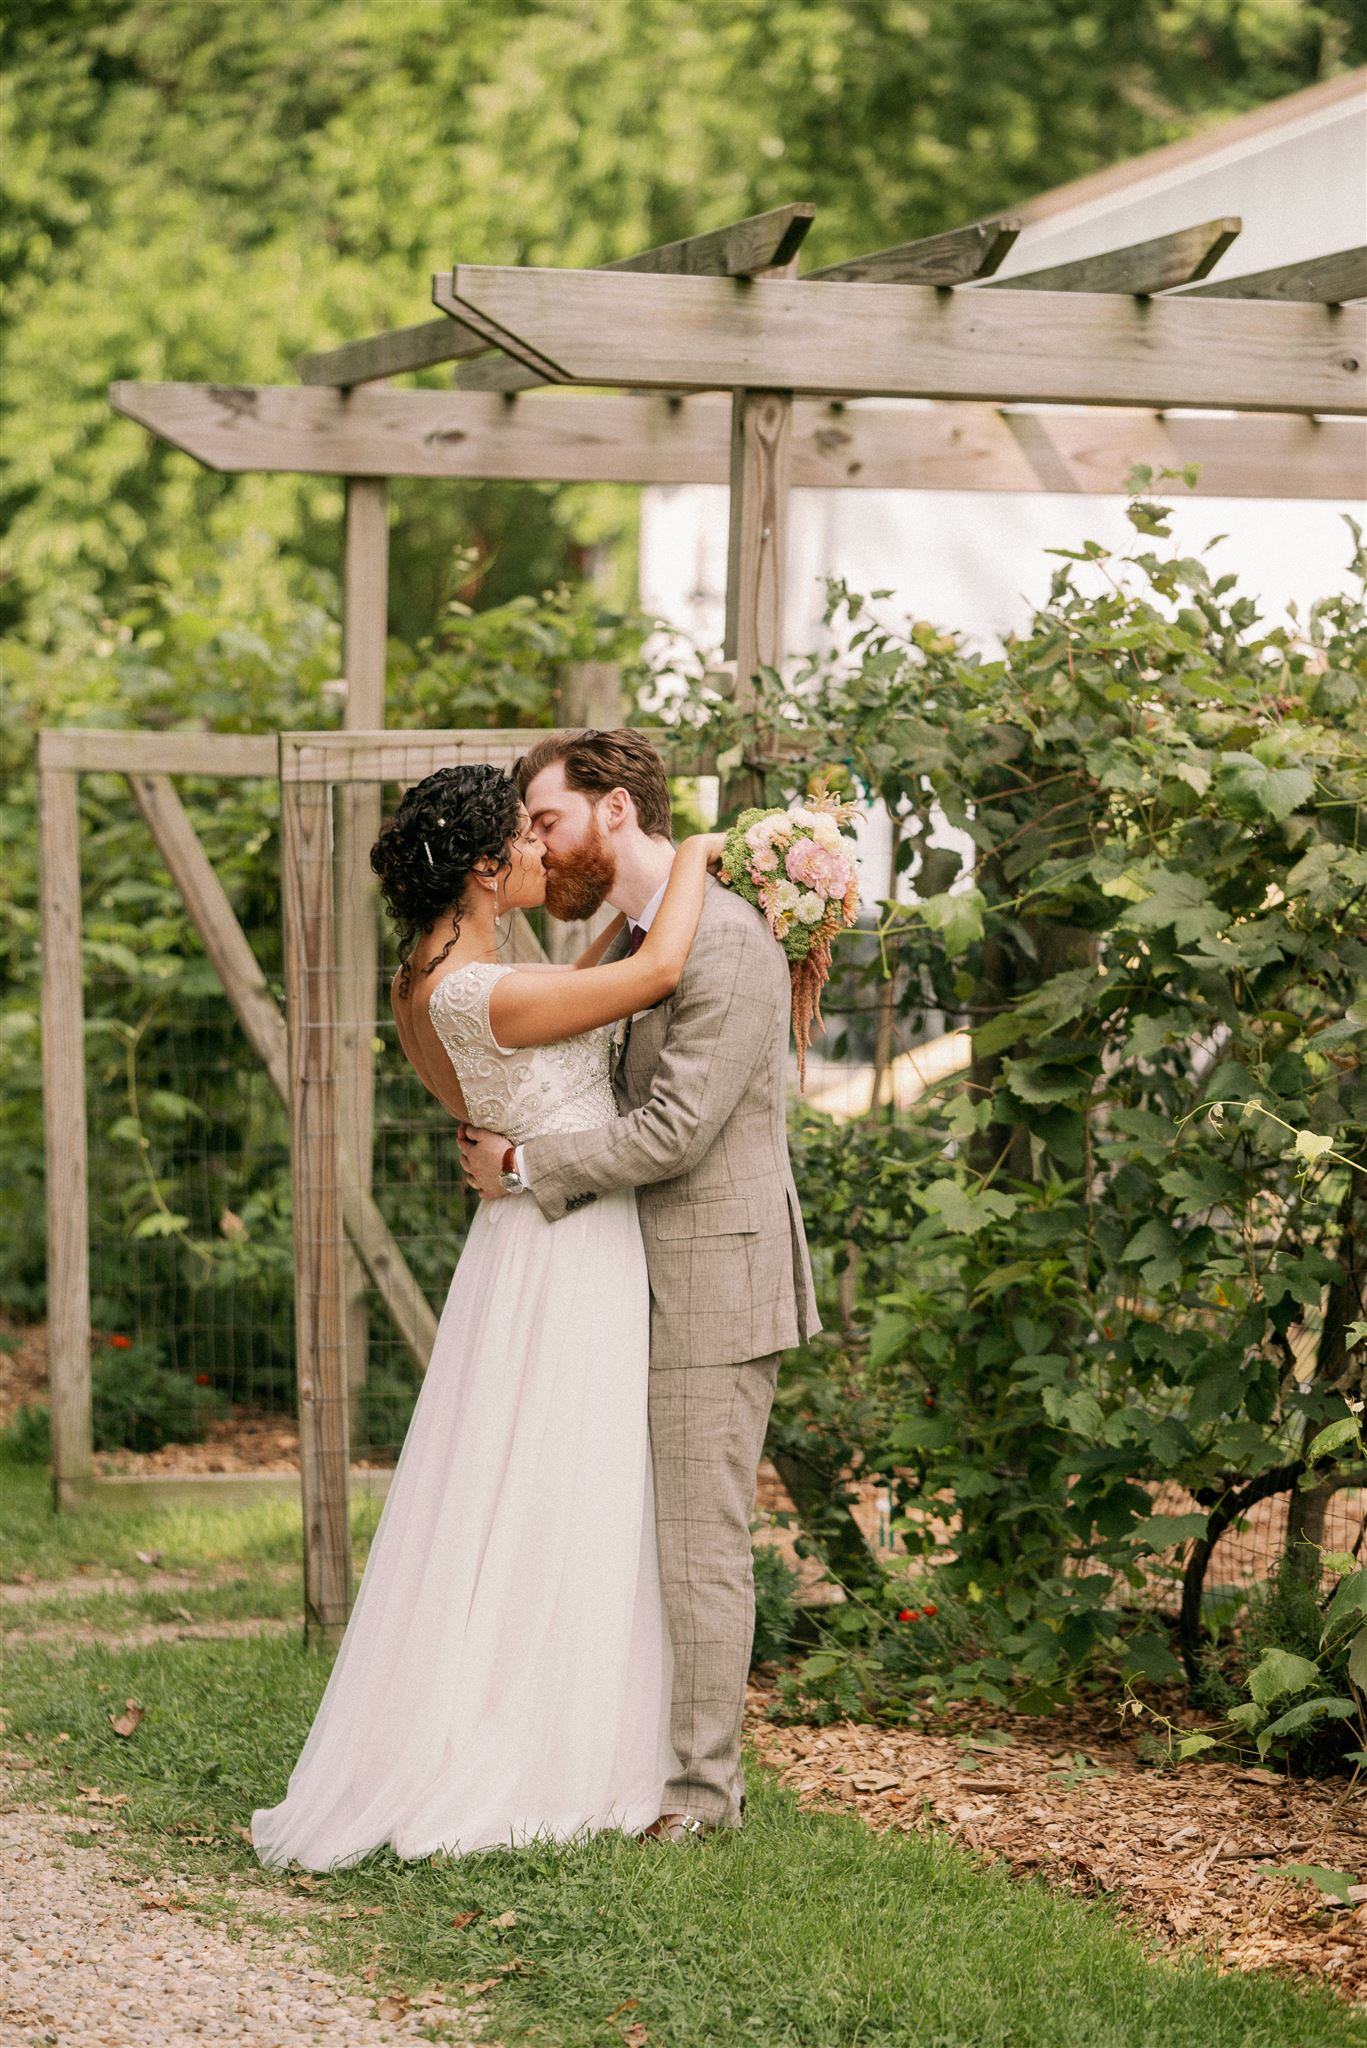 On their wedding day, a couple kisses by the grape vine gates.